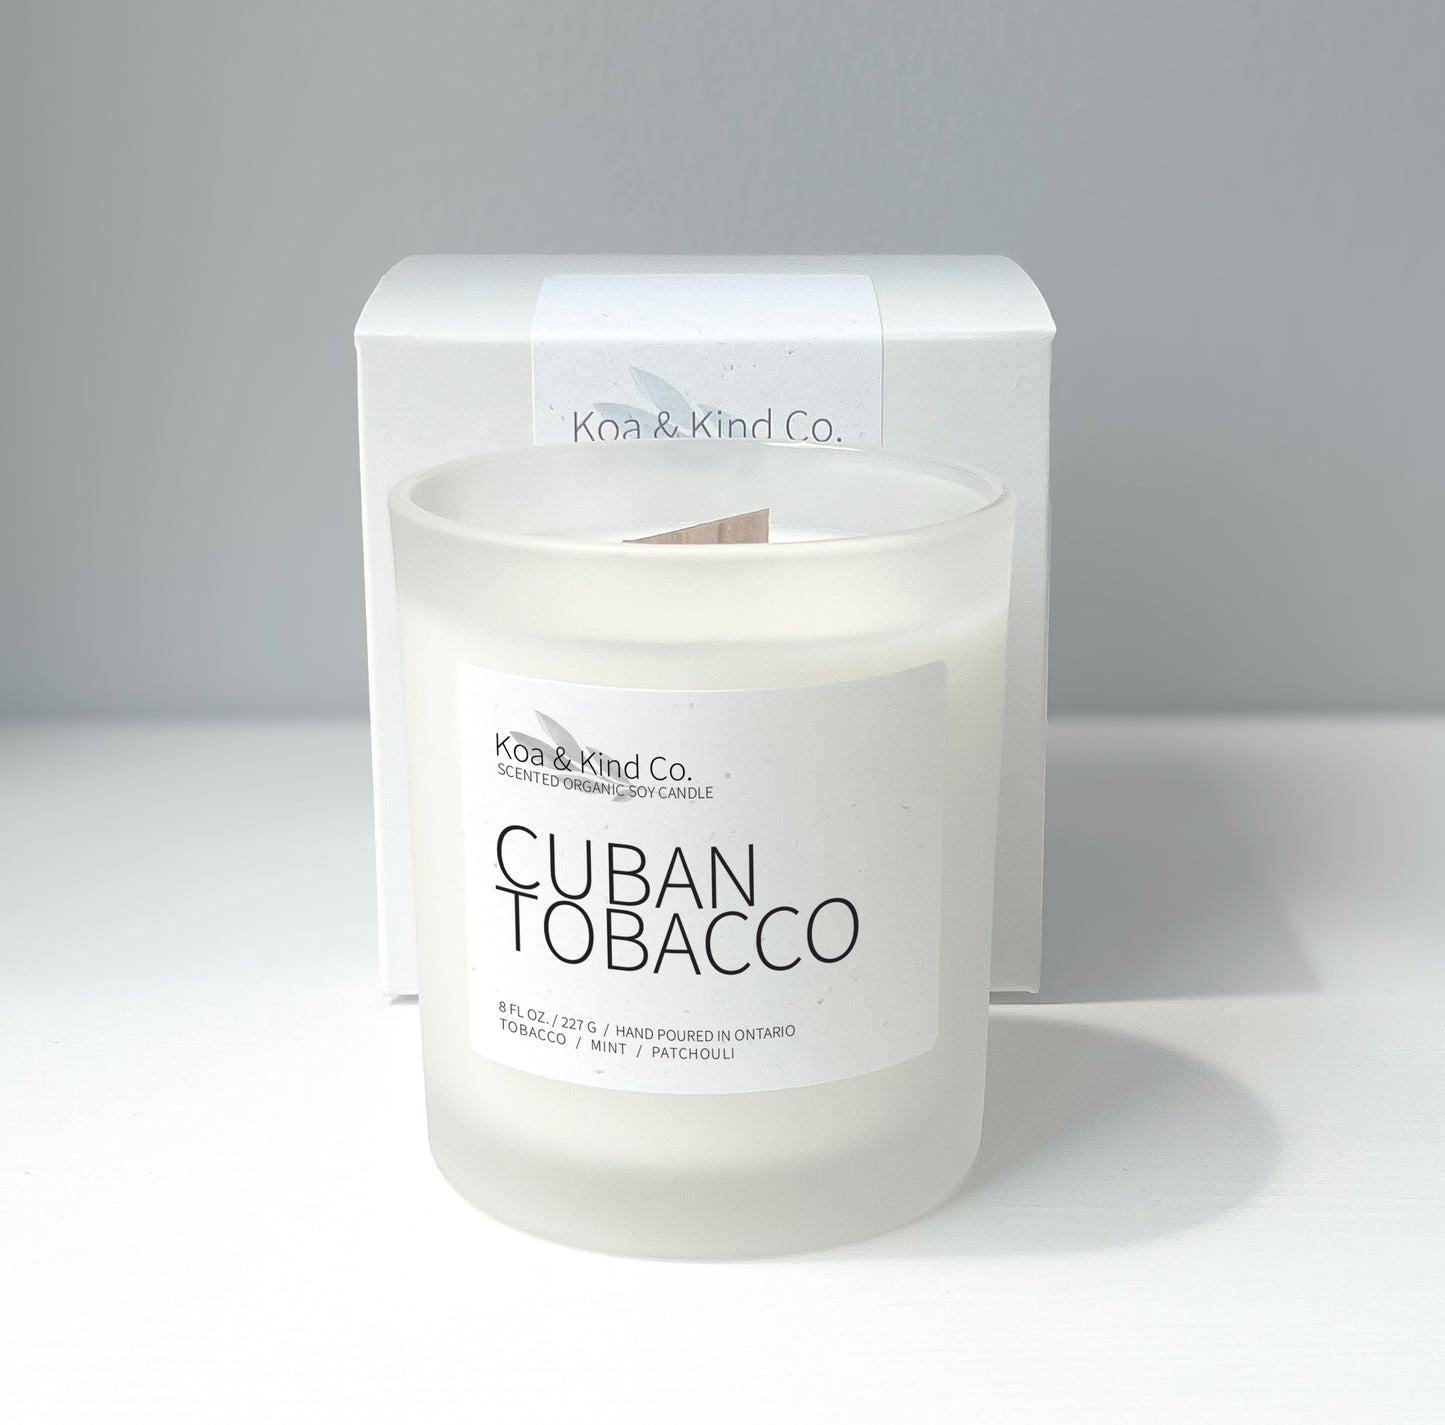 Cuban Tobacco Scented Soy Candle